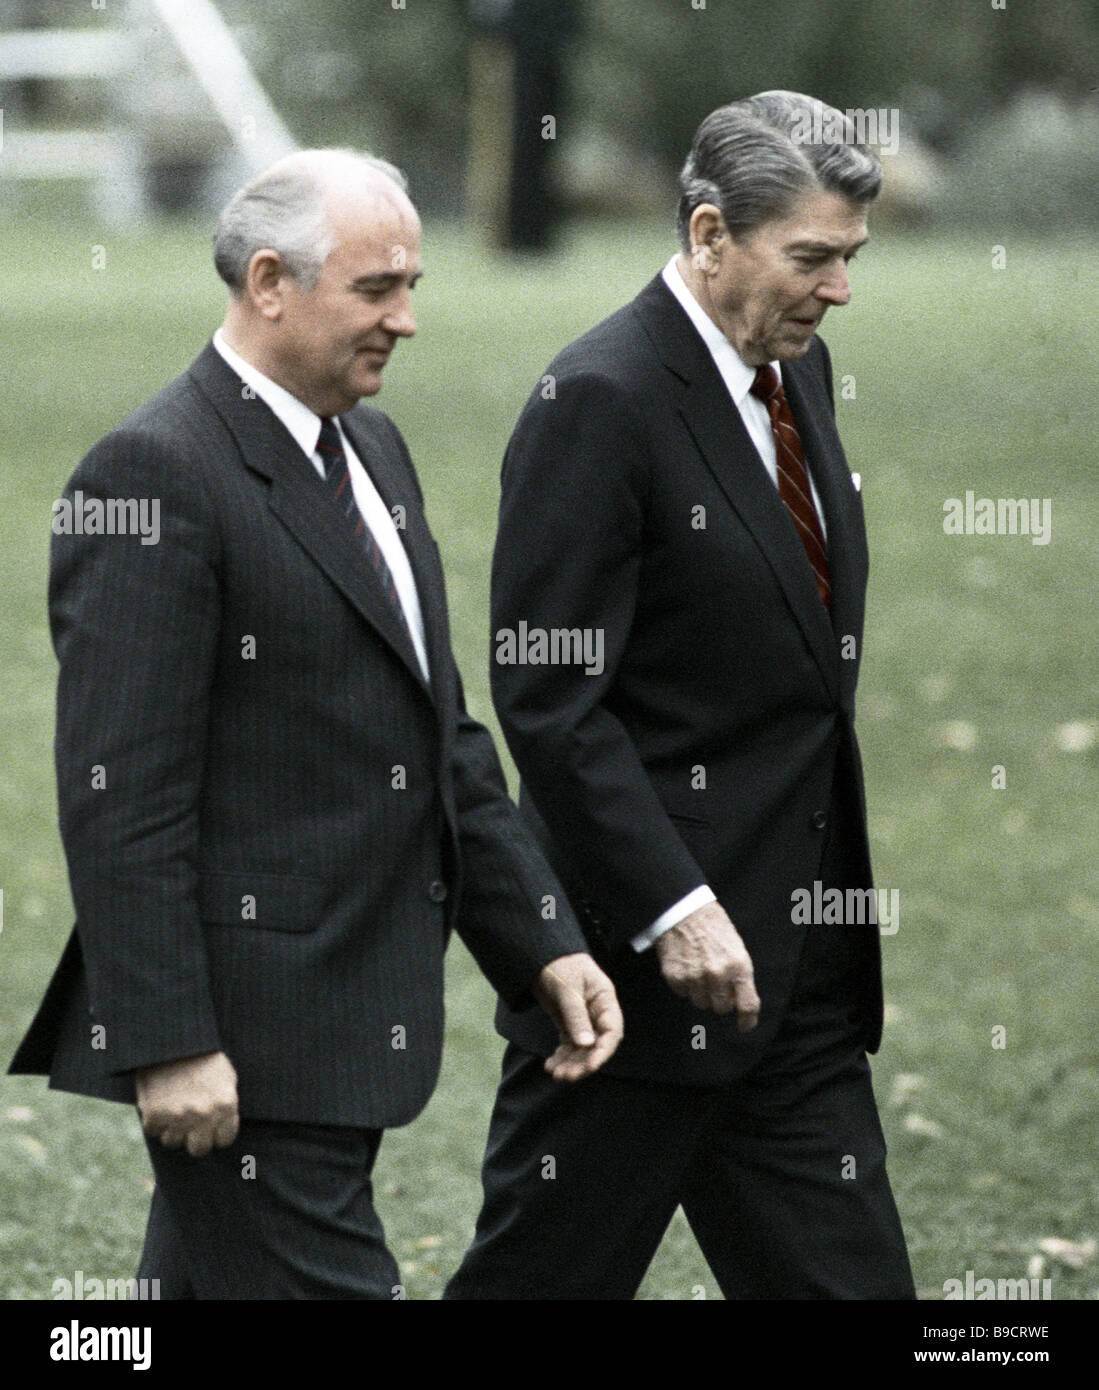 Mikhail Gorbachev left and Ronald Reagan talking during a walk Stock ...